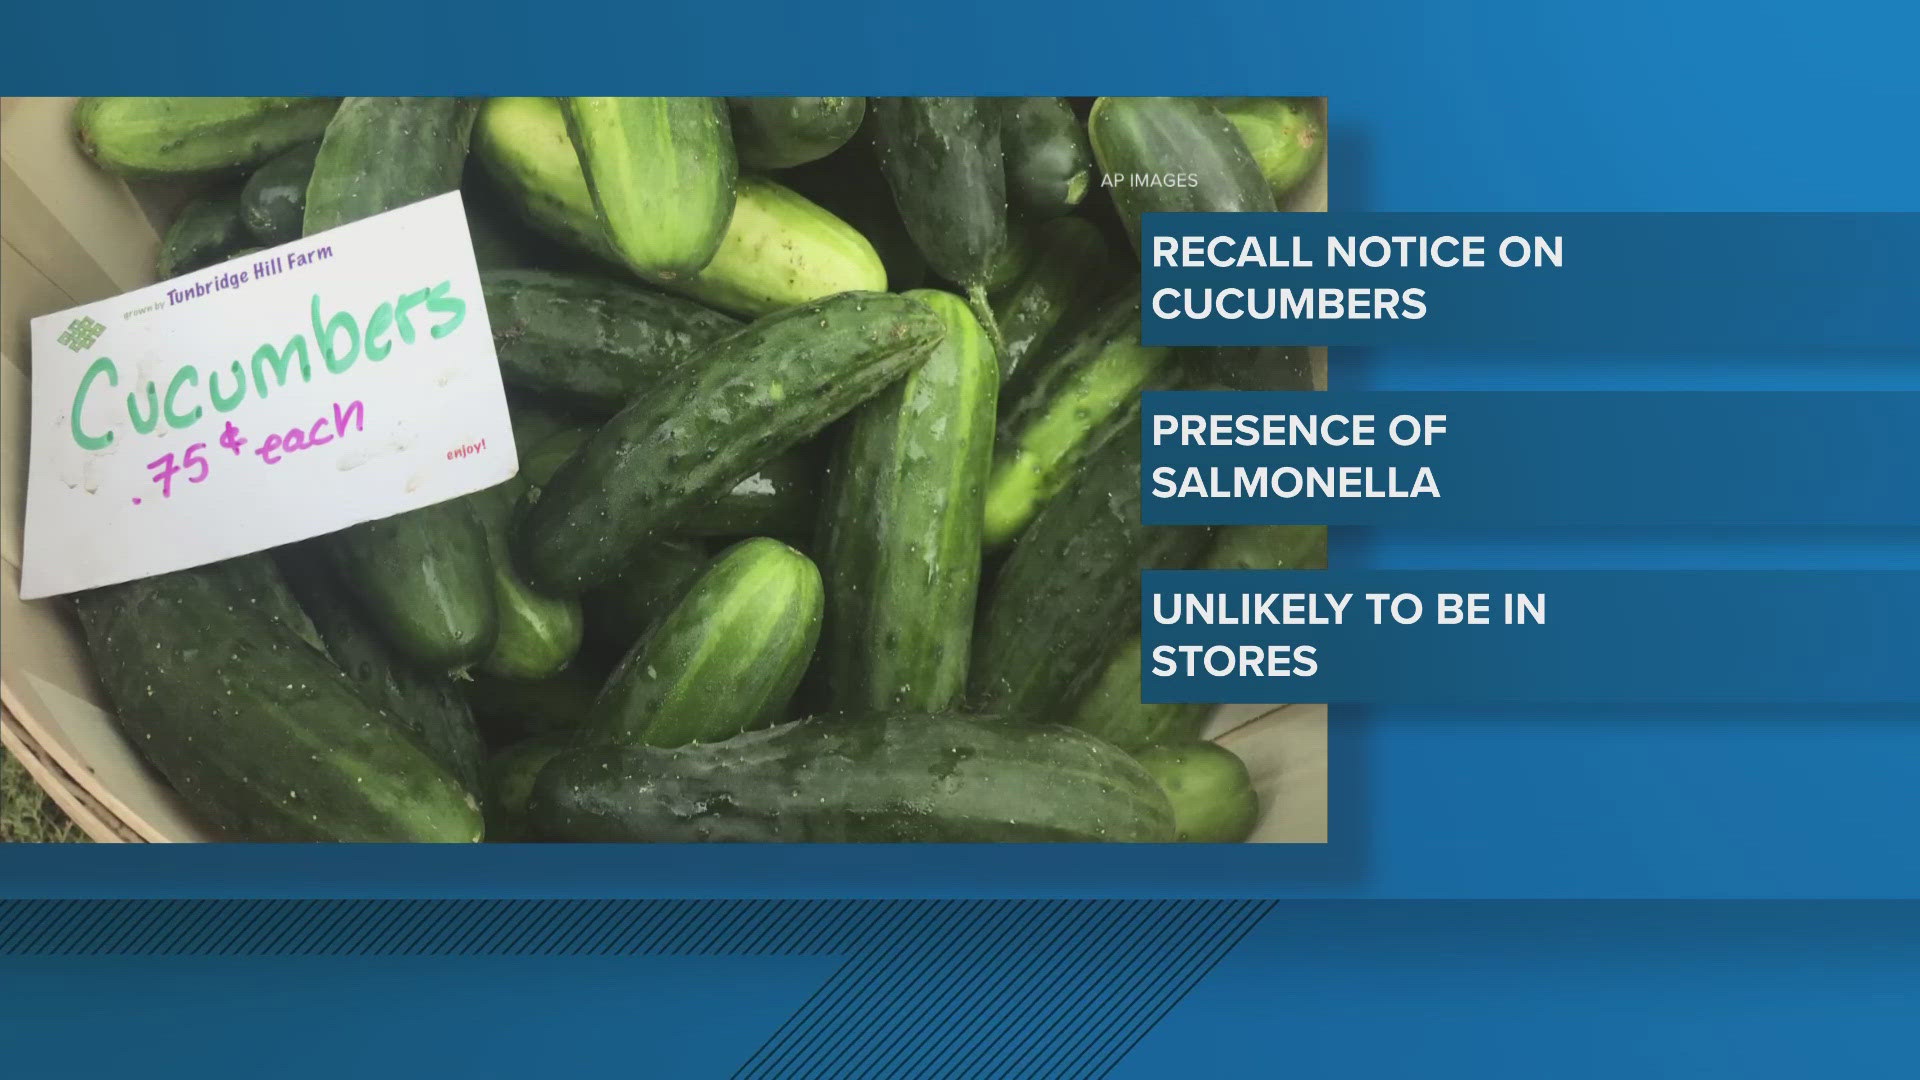 The recall notice did not specify which retailers may have sold the recalled cucumbers.